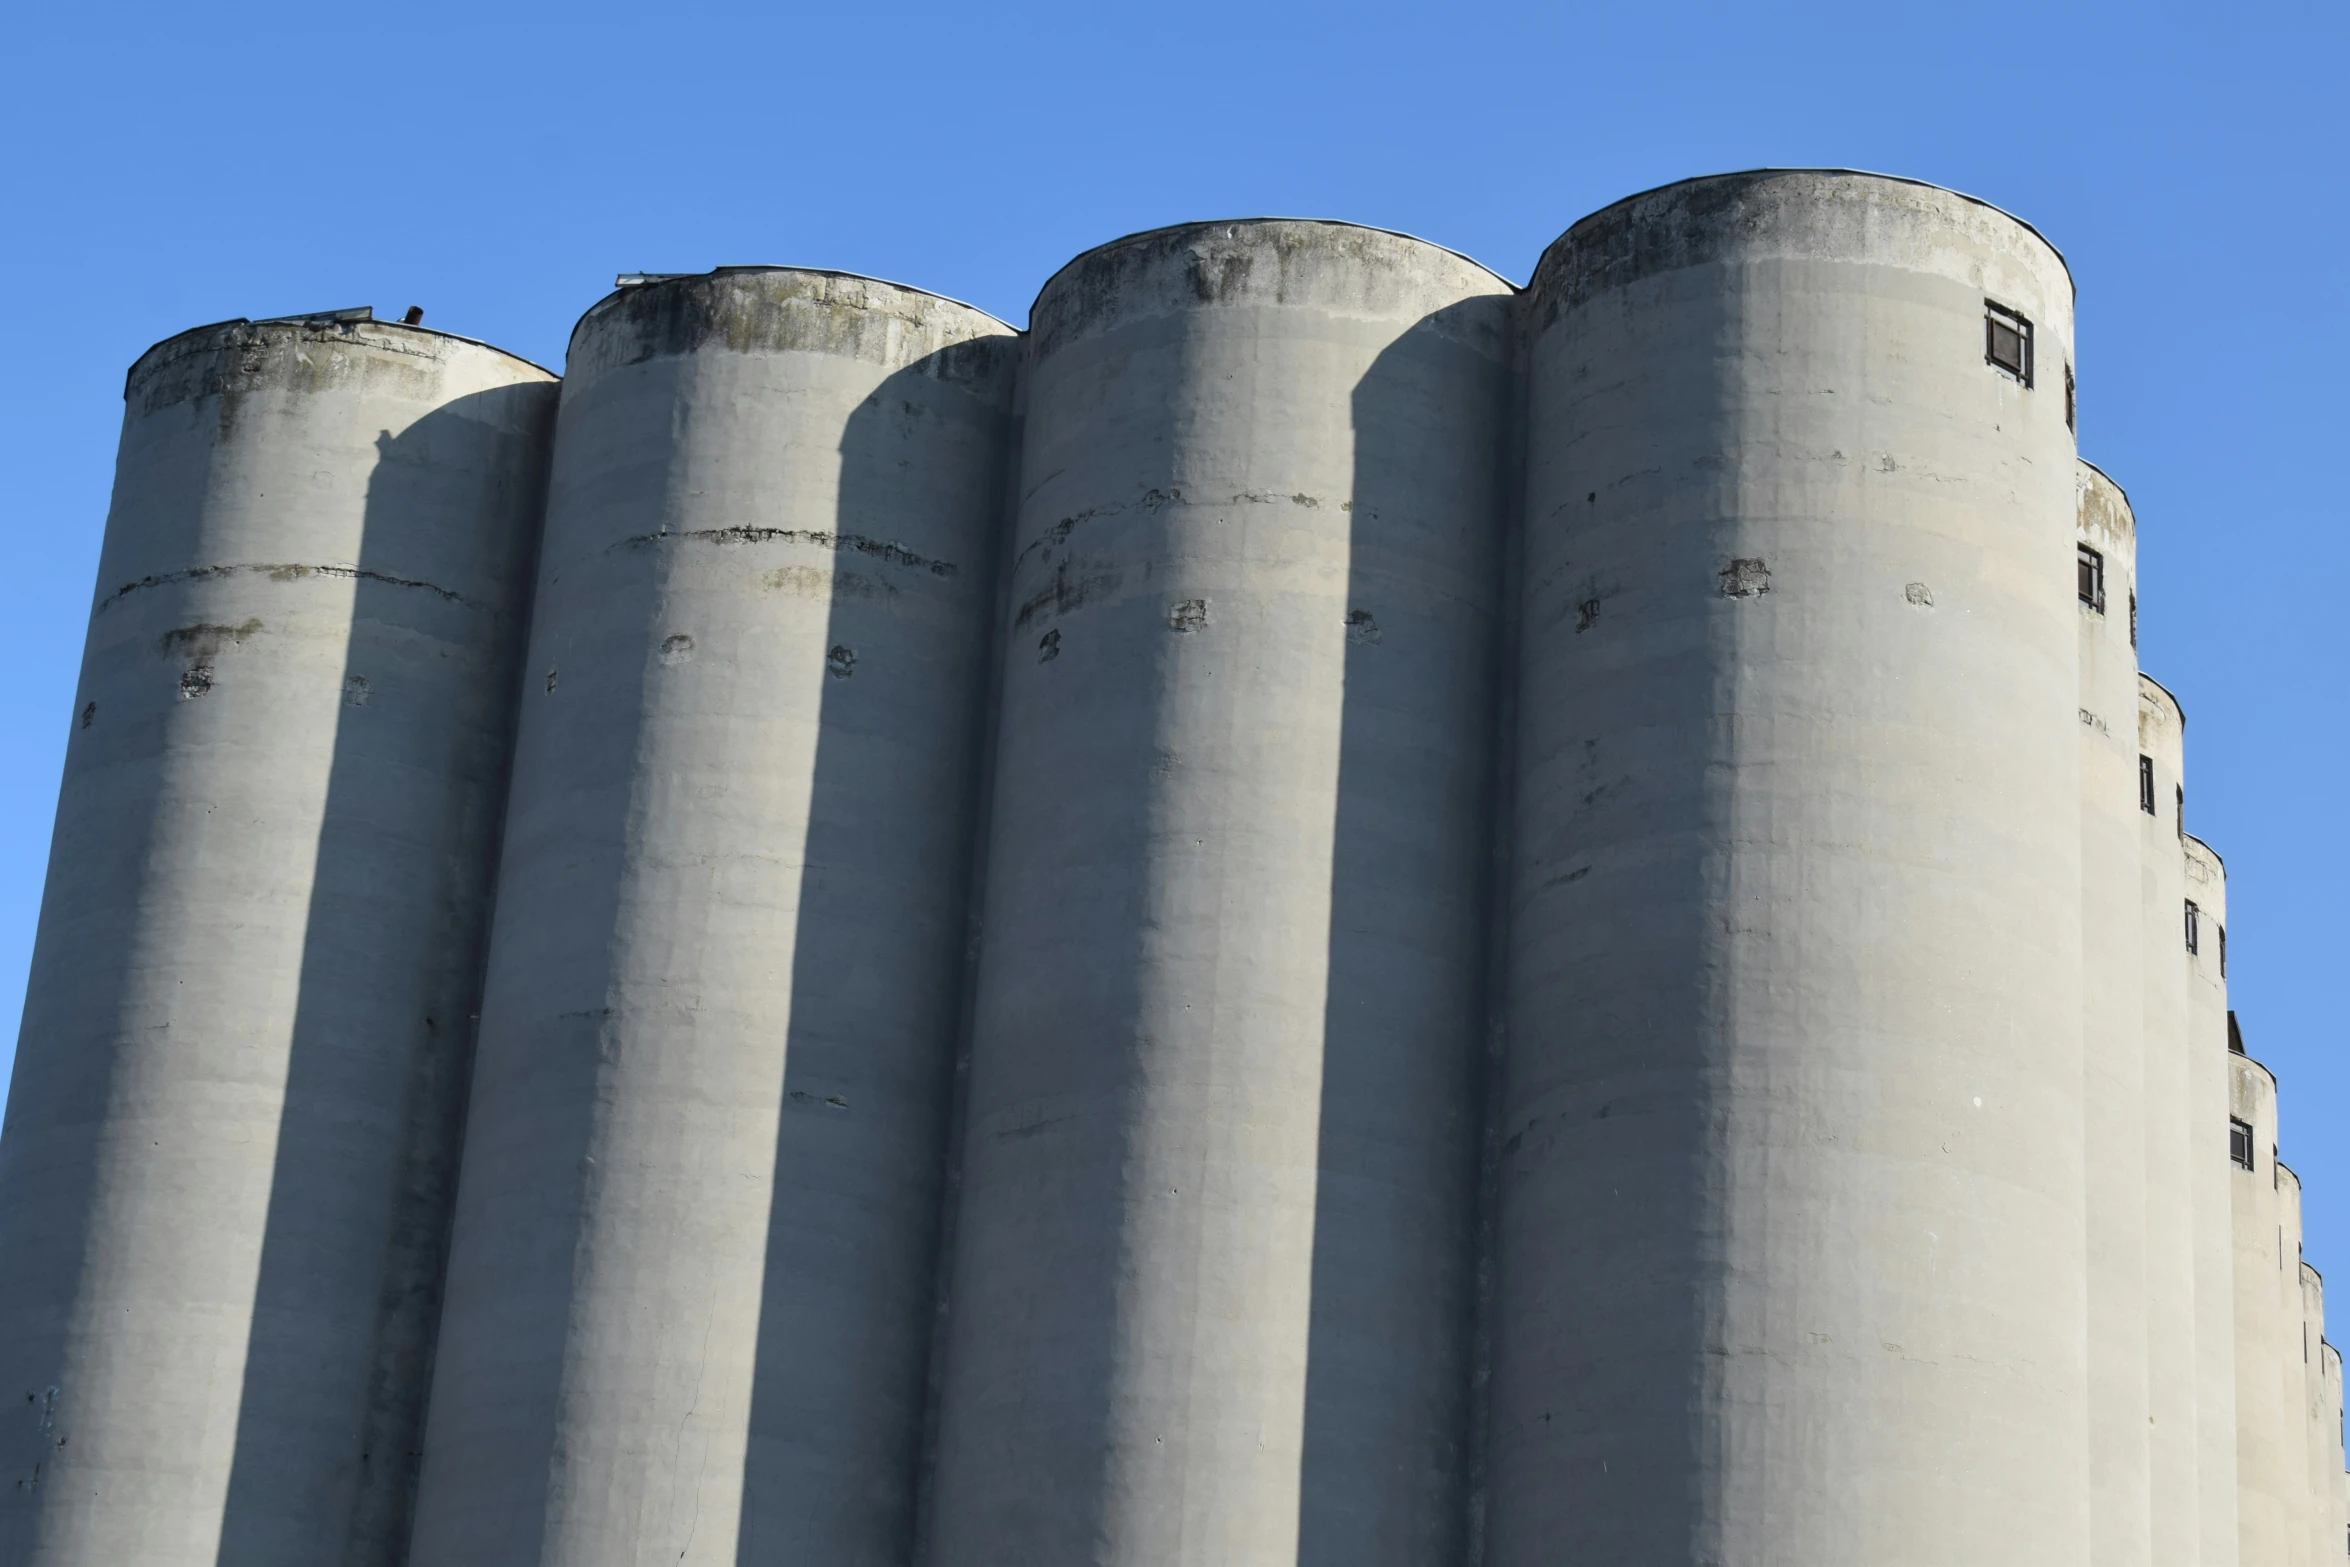 three tall silos with one bird perched on one